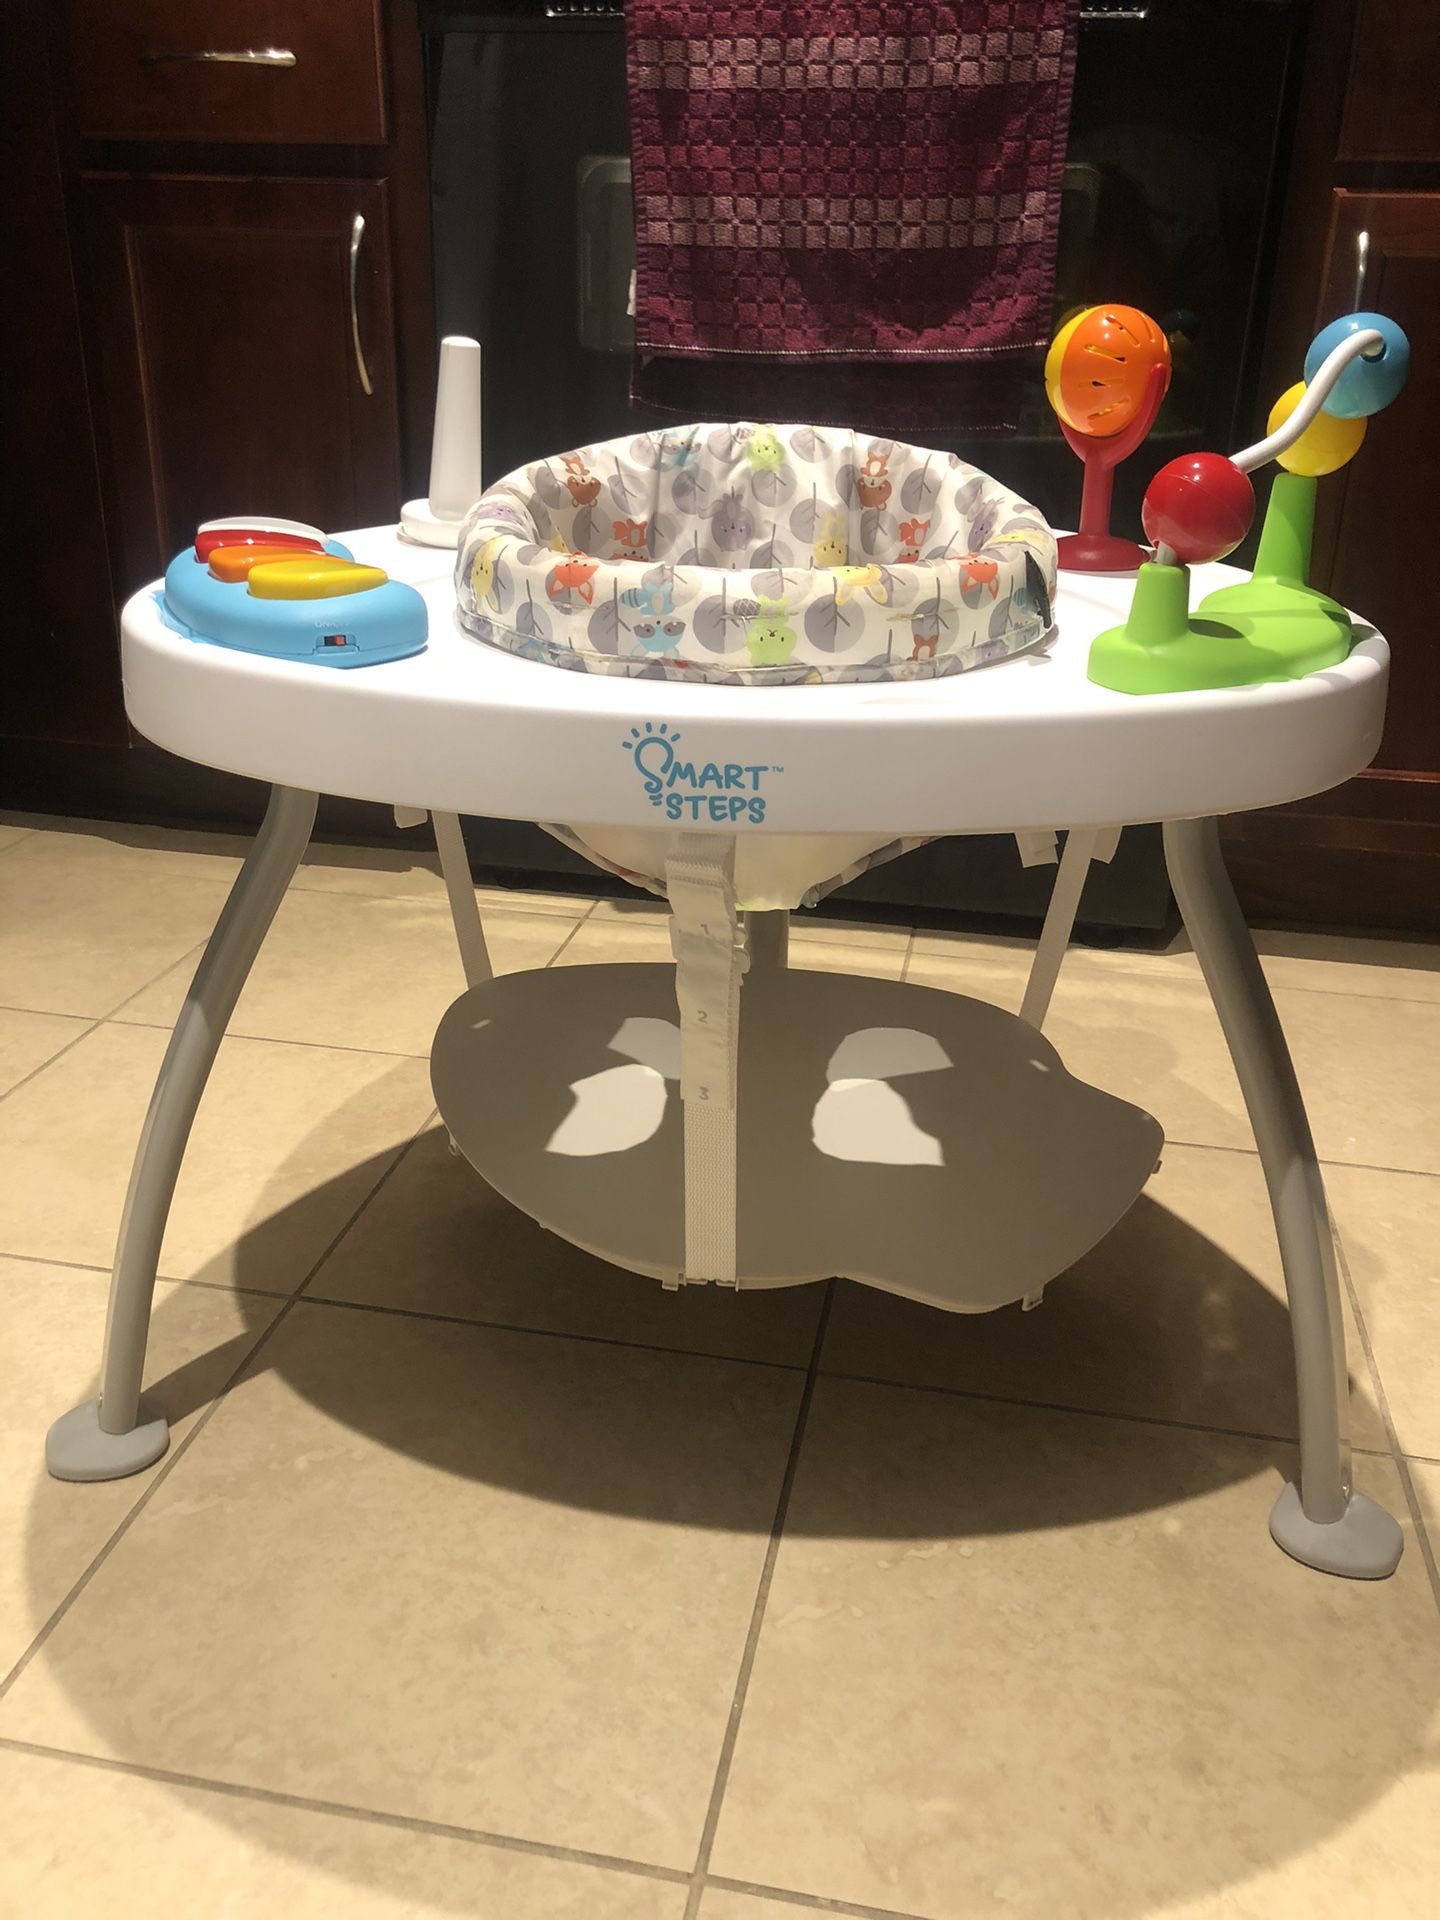 Smart Steps by Baby Trend Bounce & Play 3-in-1 Activity Center for Babies